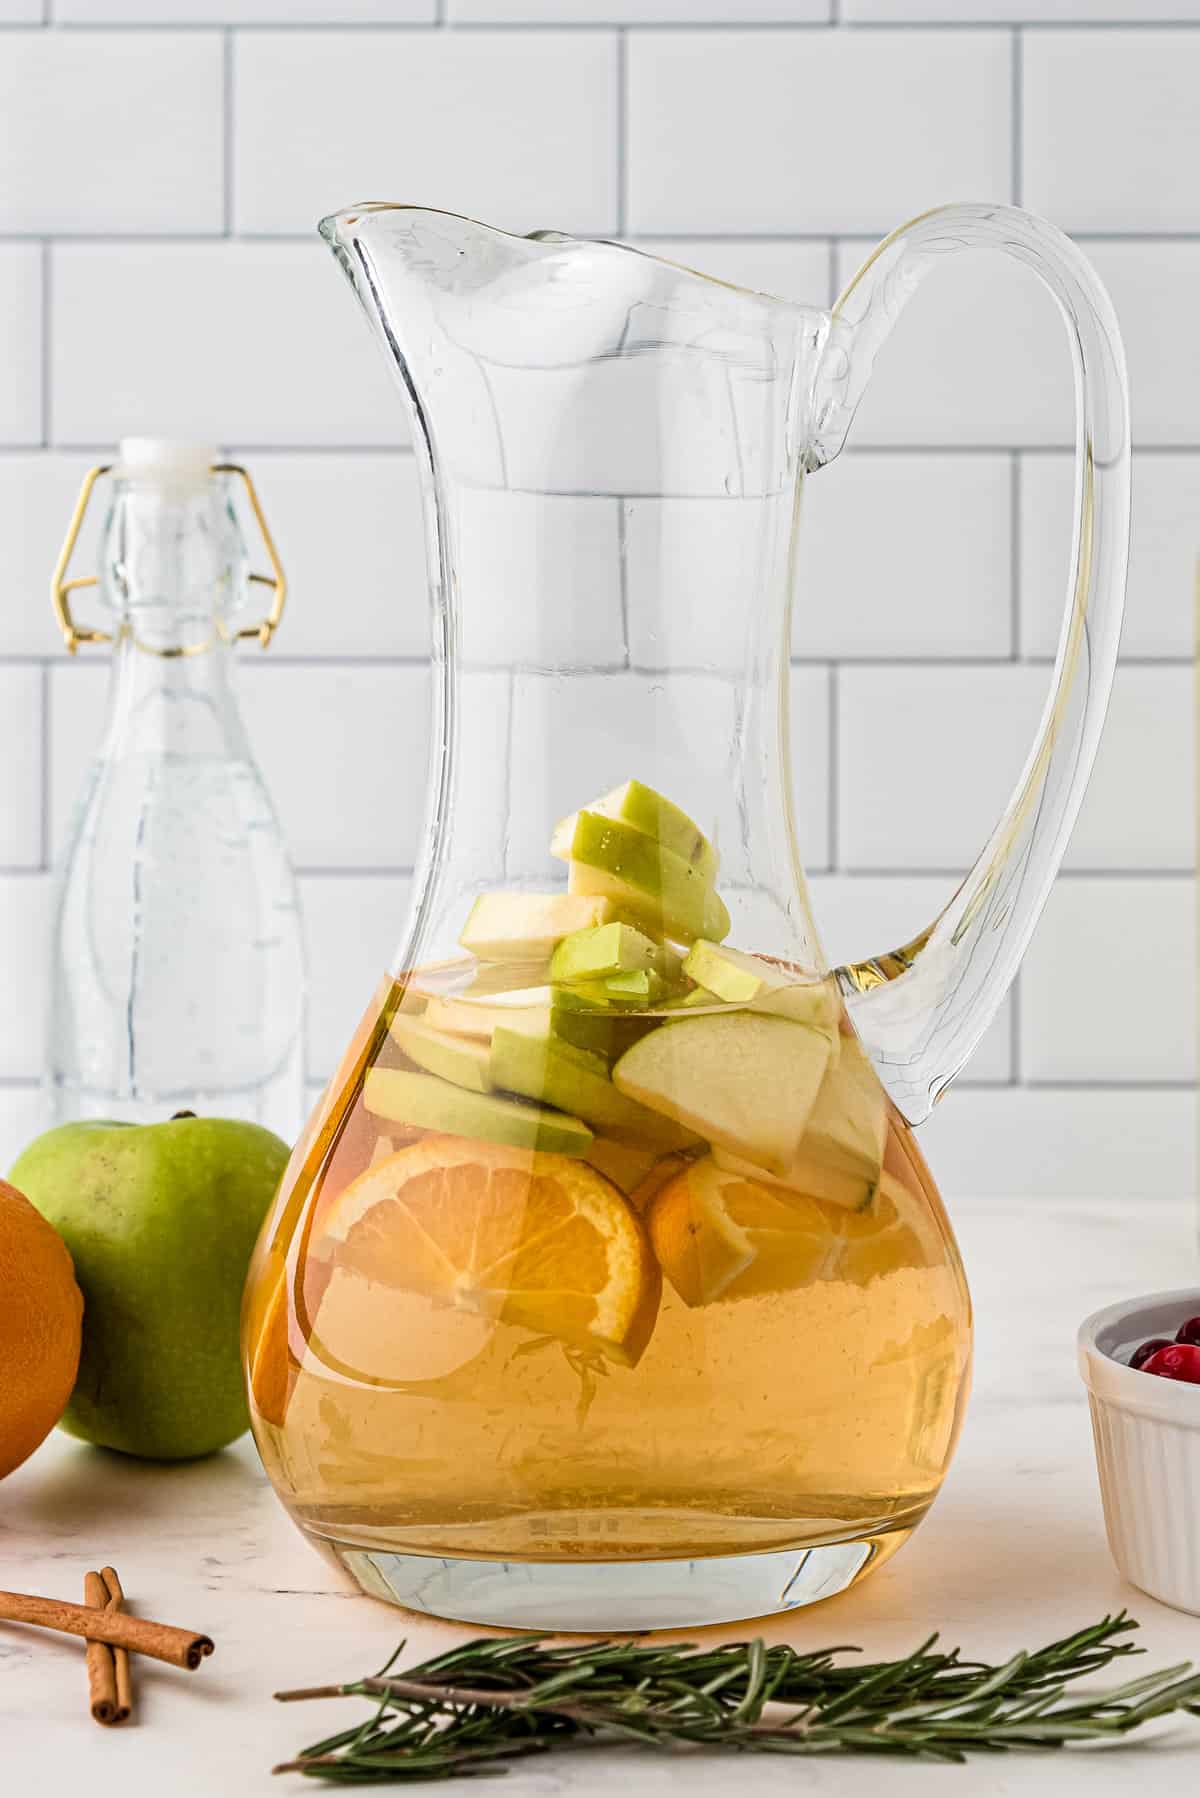 Pitcher with oranges, apples and white sangria